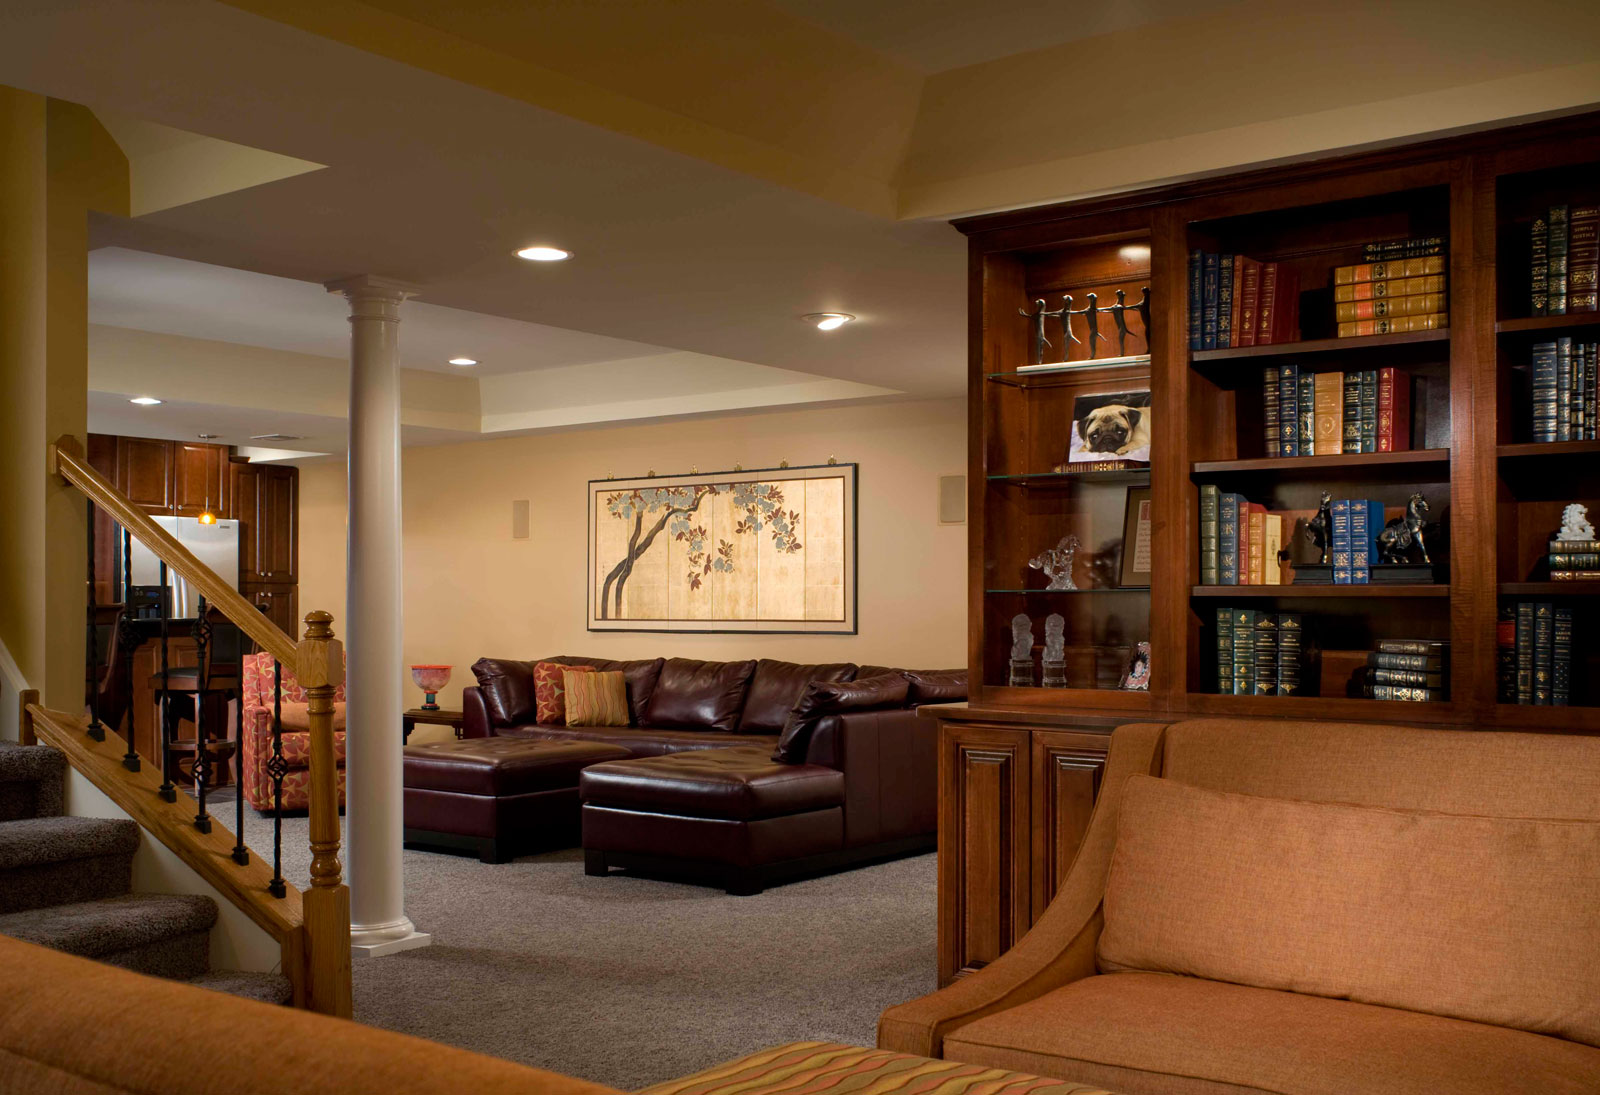 Finishing Ideas Traditional Amusing Basement Finishing Ideas Decorated With Traditional Decoration Completed With Wooden Bookshelf And Brown Leather Sofa Design Basement Basement Finishing Ideas Leading To Stunning Results